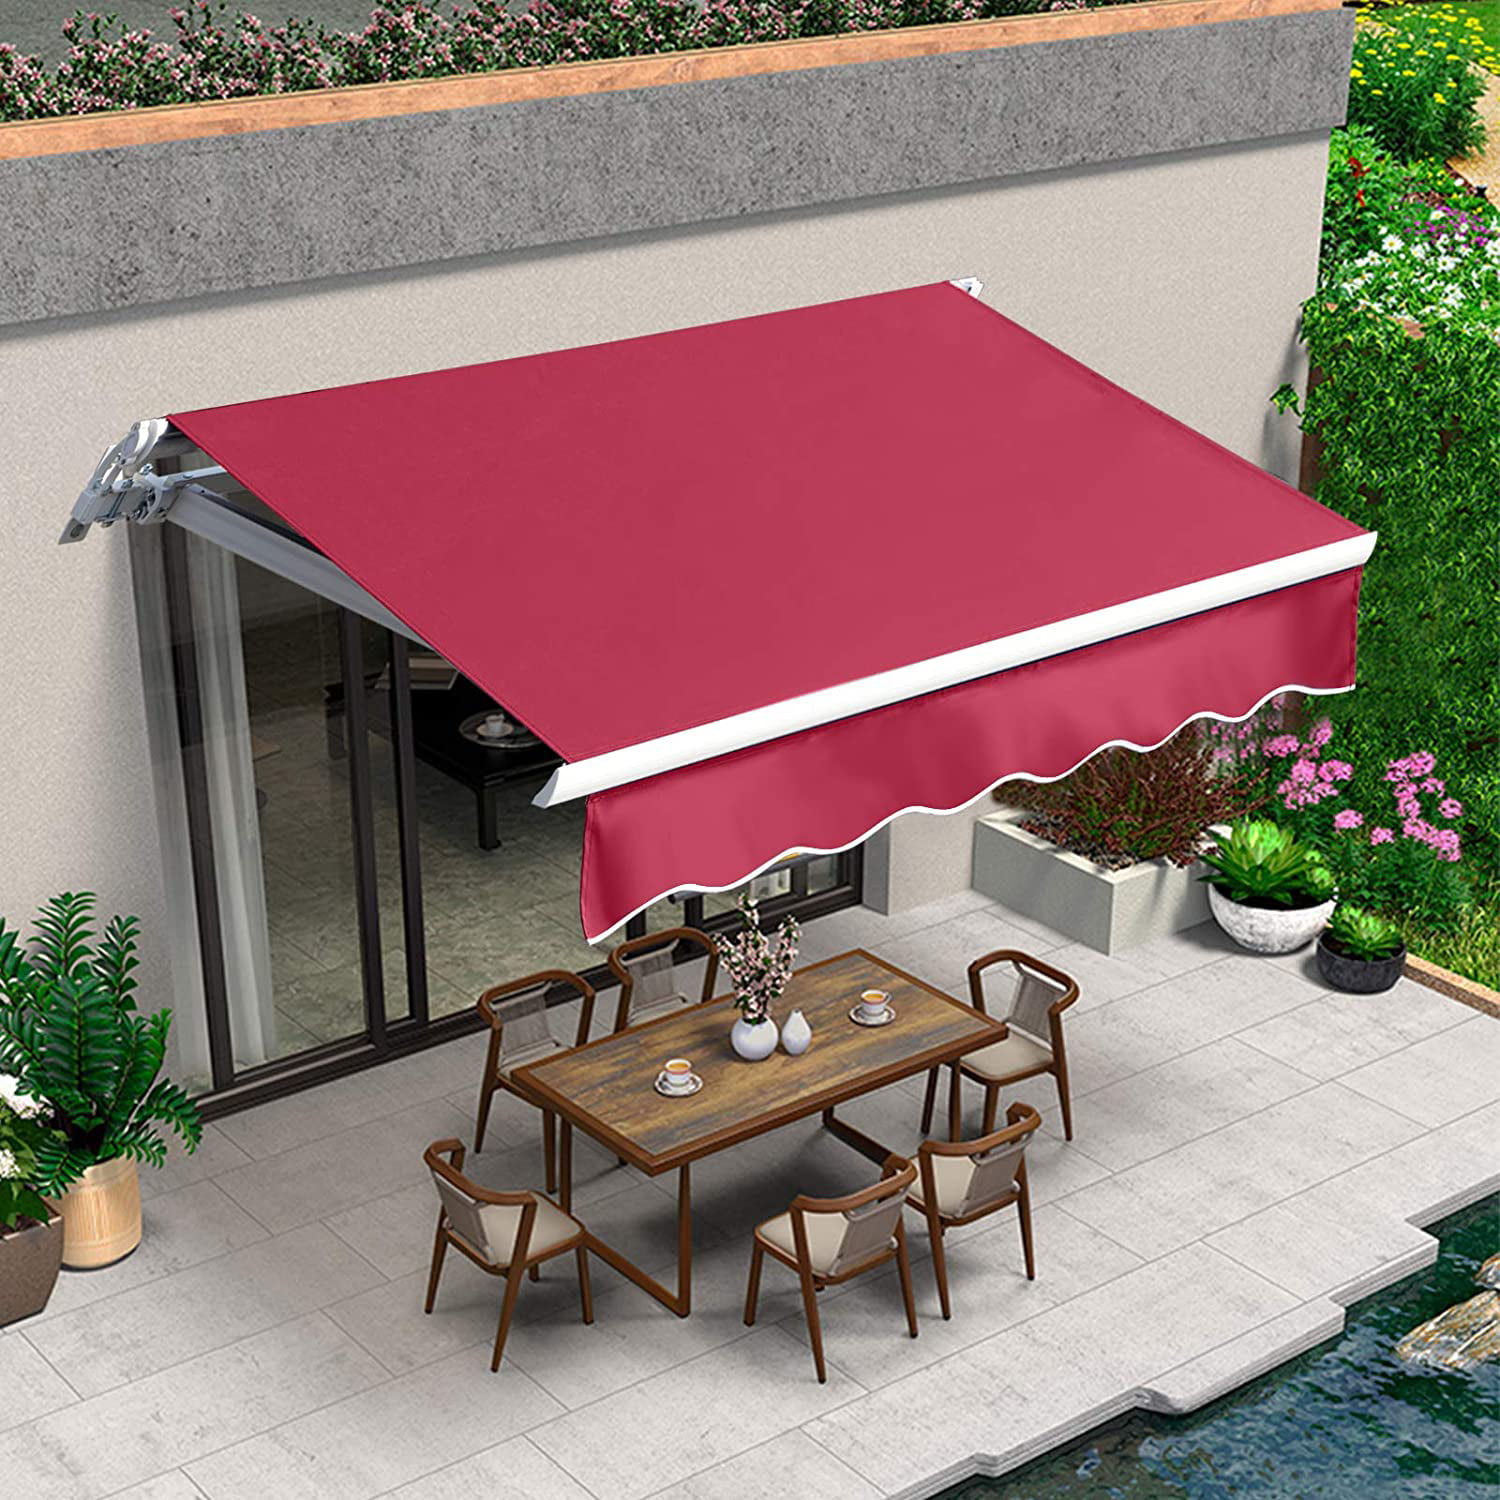 8× 6.5 Retractable Awning Aluminum Patio Sun Shade Awning Cover w/Crank Handle 